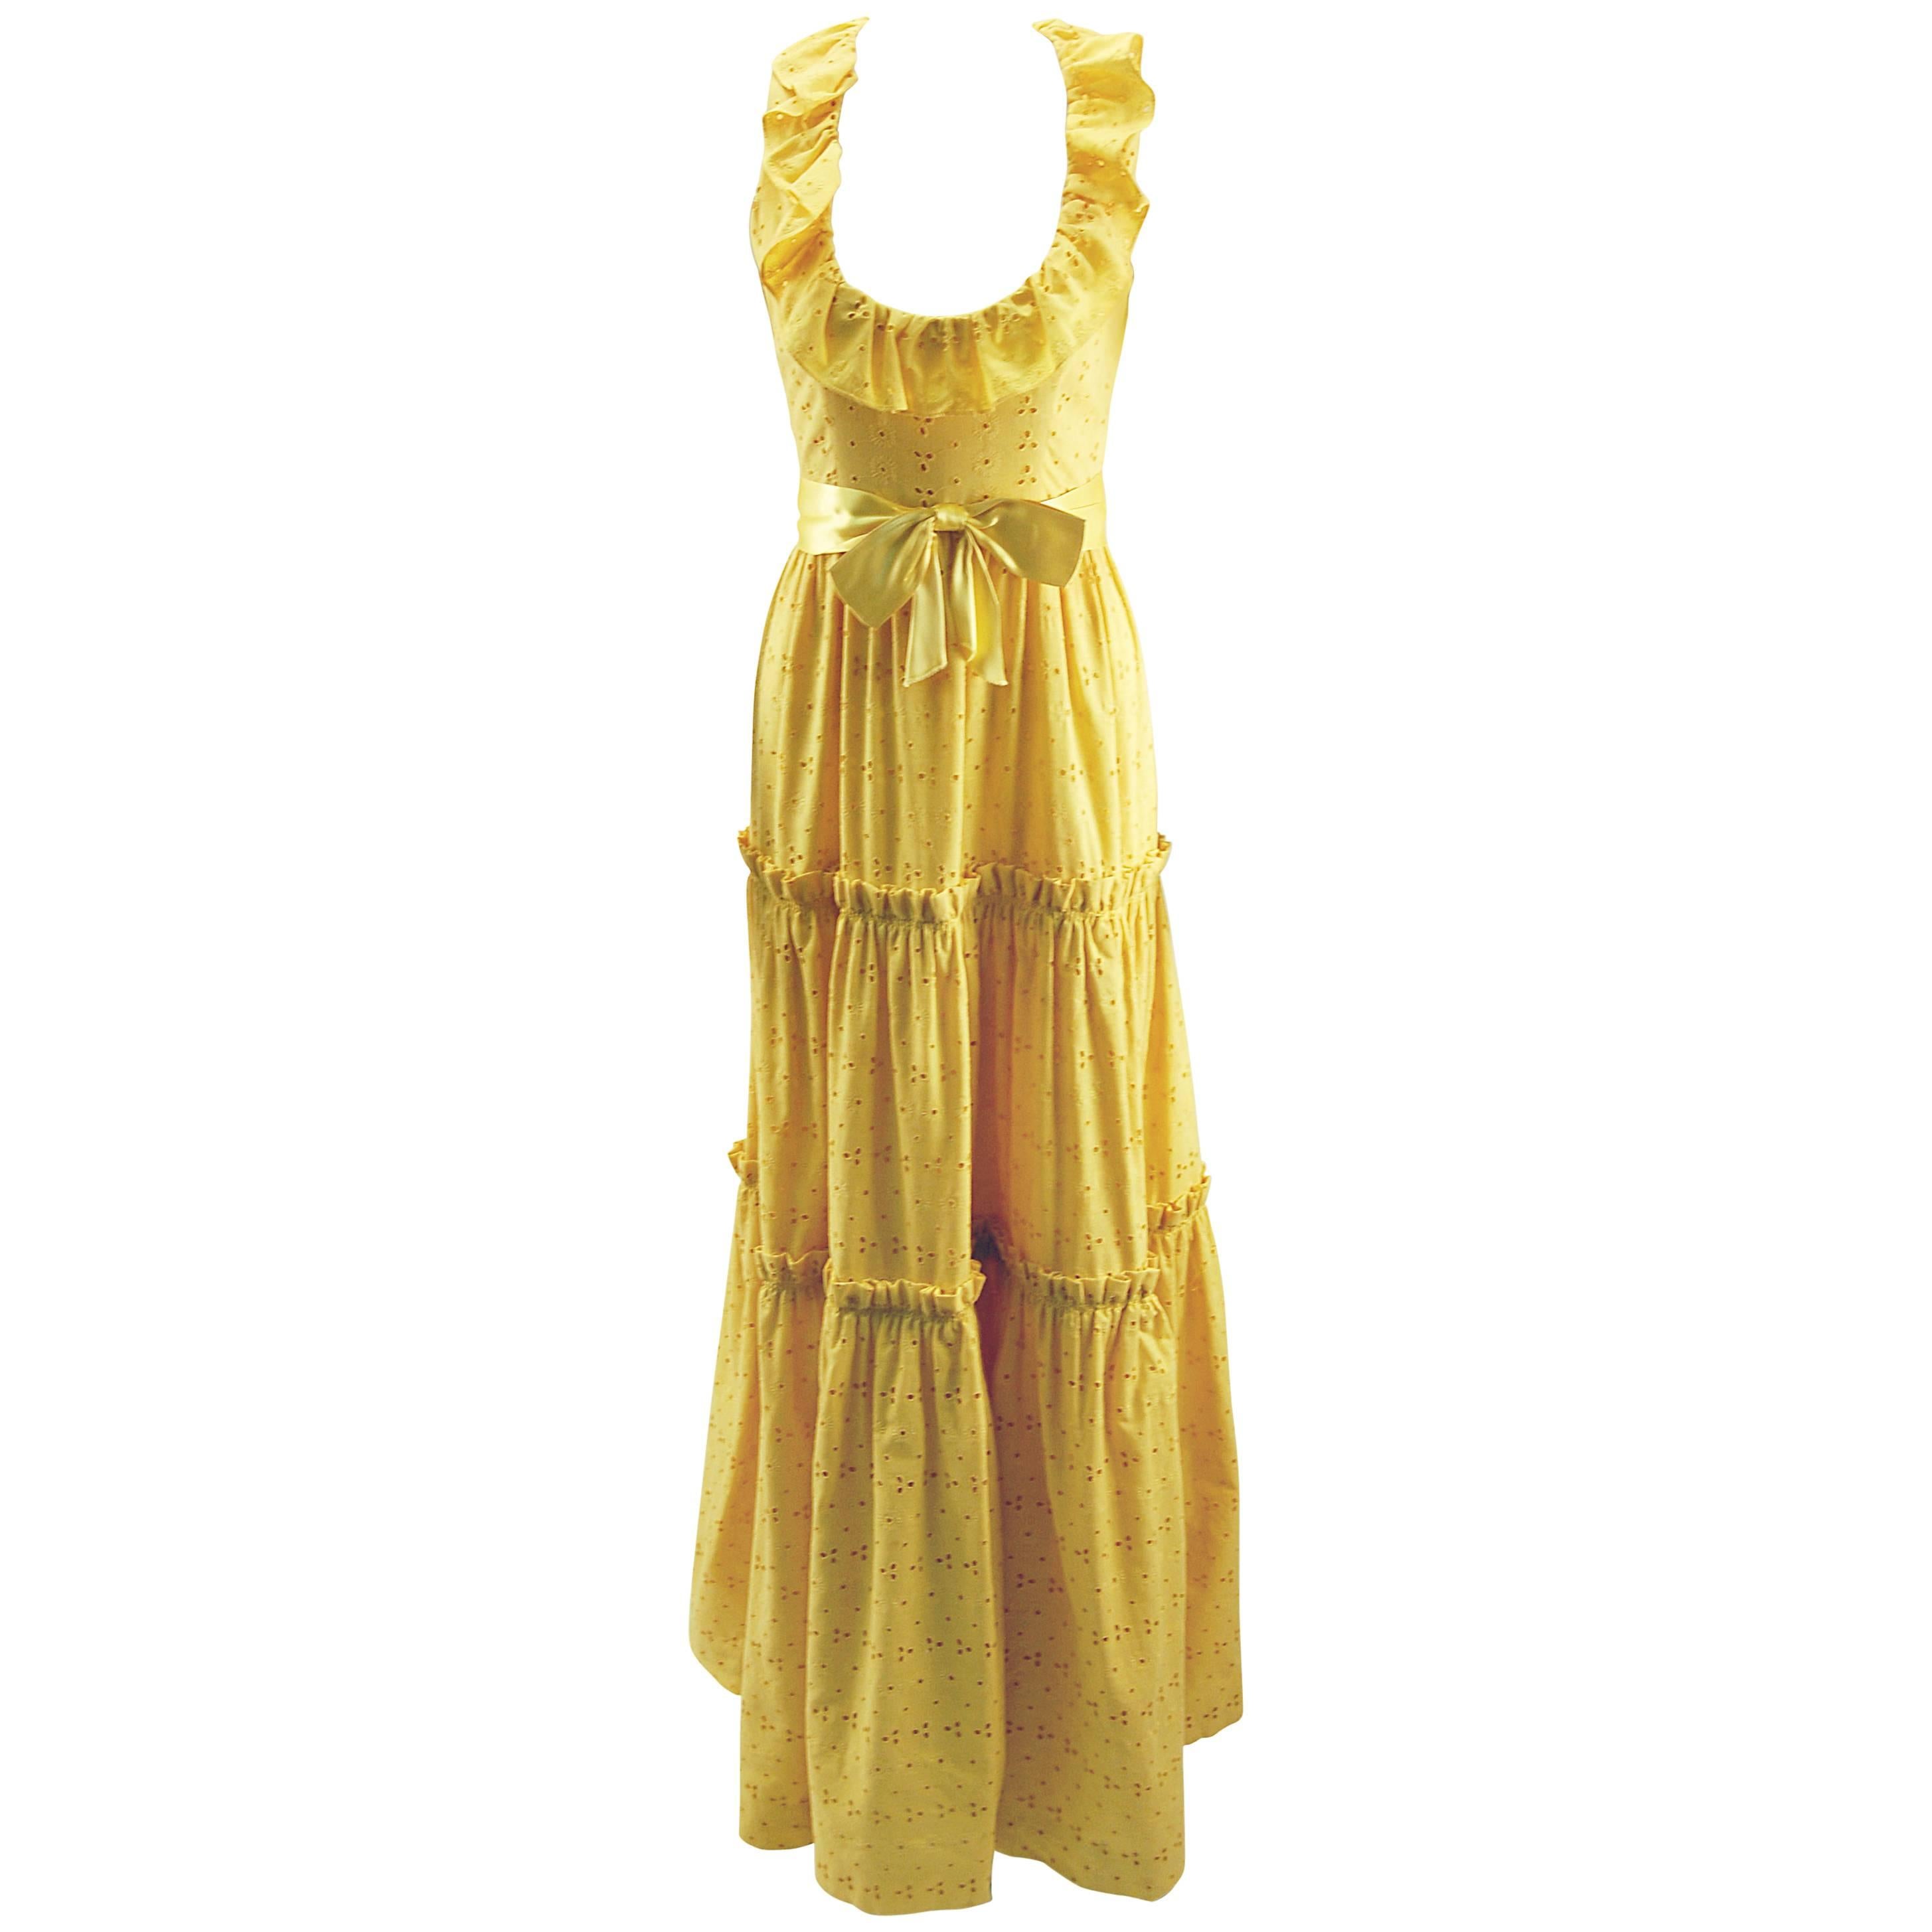 1970s Molly Parnis Summer Maxi Dress with Yellow Eyelet Lace